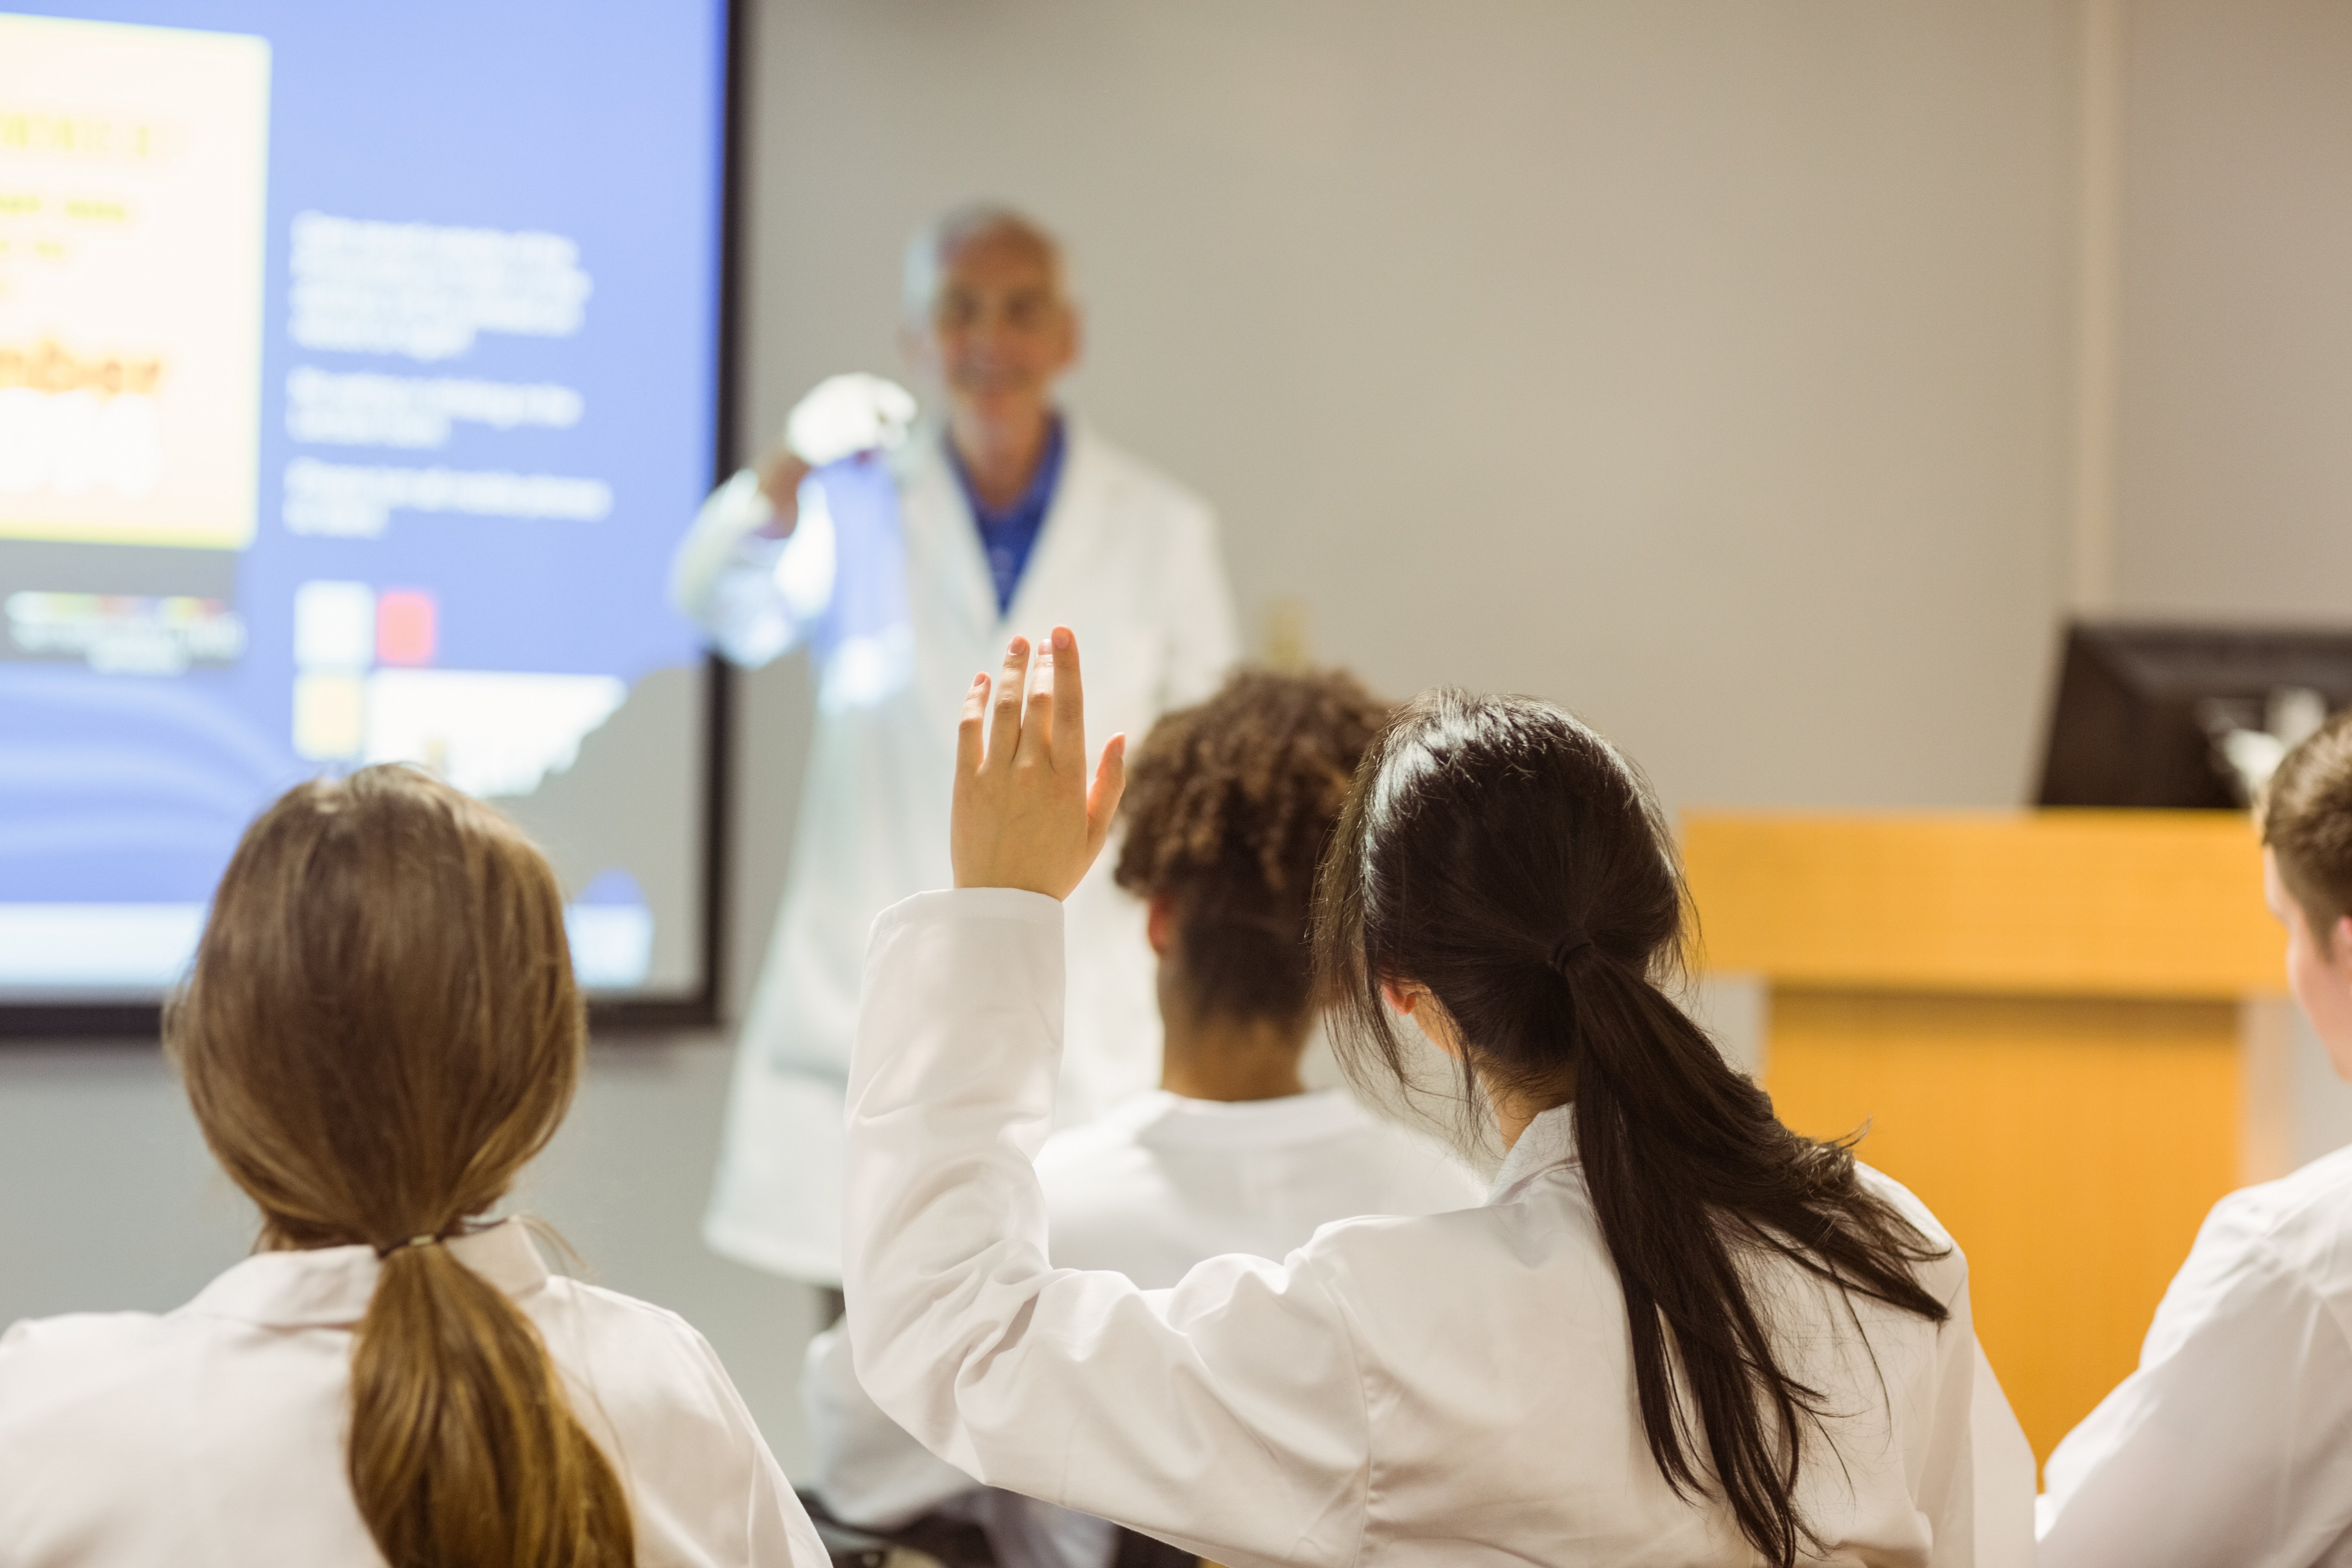 A medical student raising her hand in class